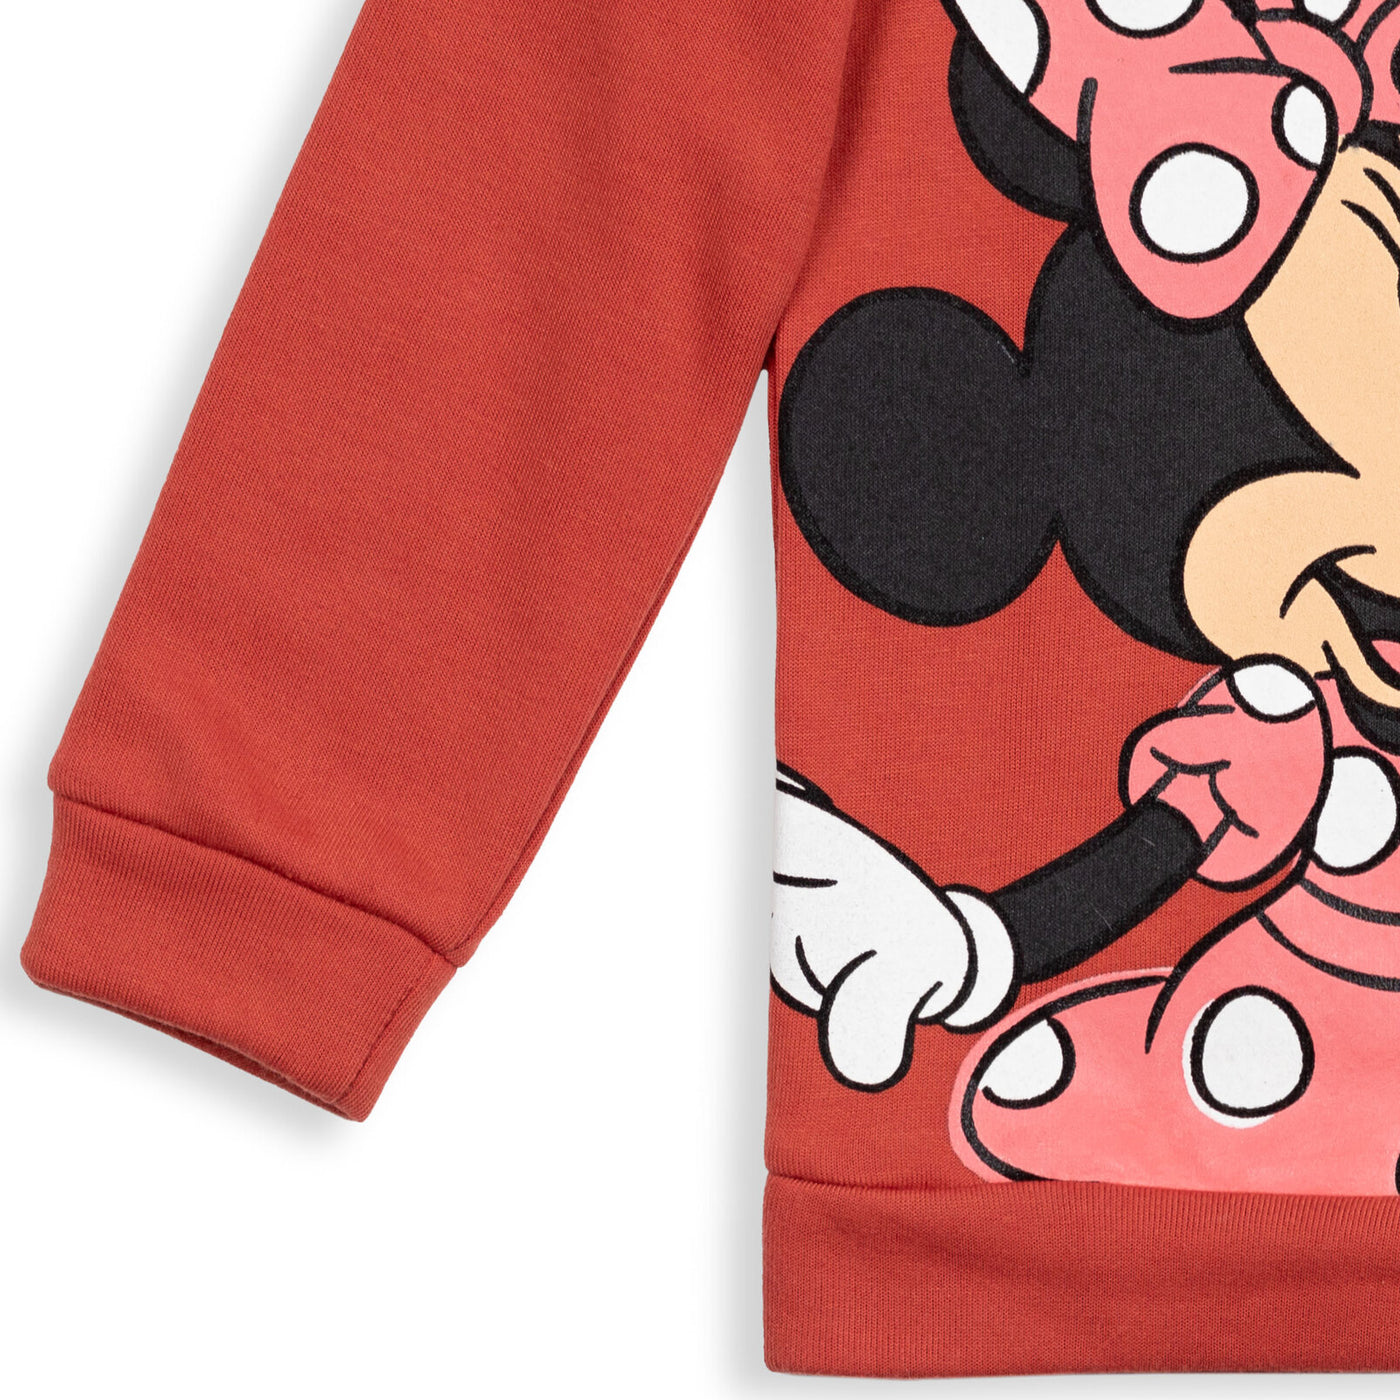  Minnie Mouse Toddler Girls Fleece Pullover